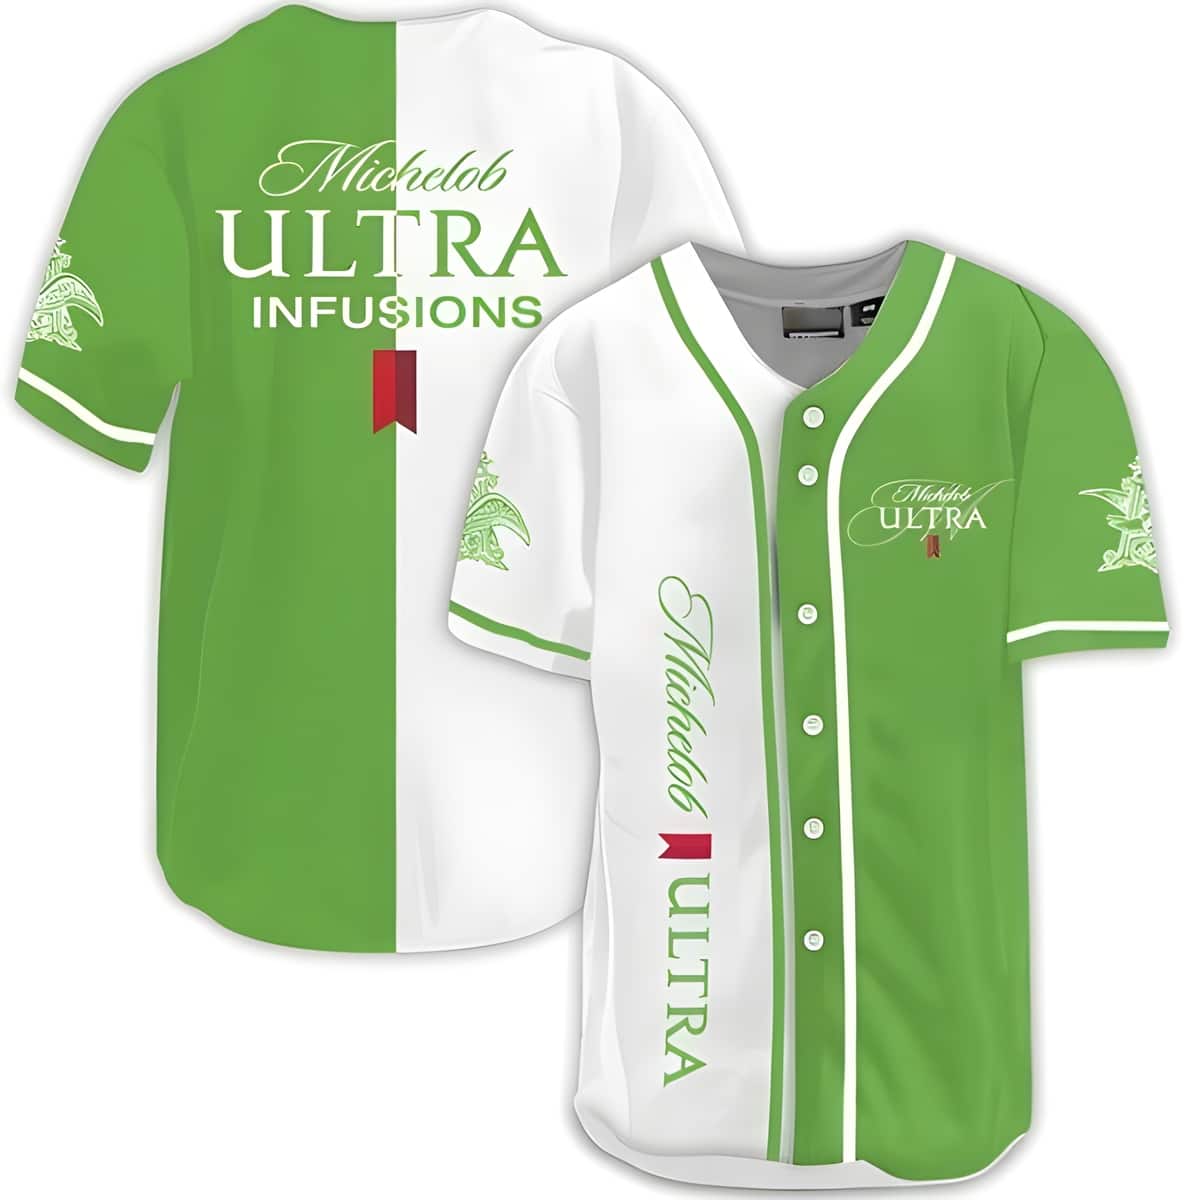 Michelob ULTRA Baseball Jersey Green White Dual Colors Gift For Boyfriend Dad